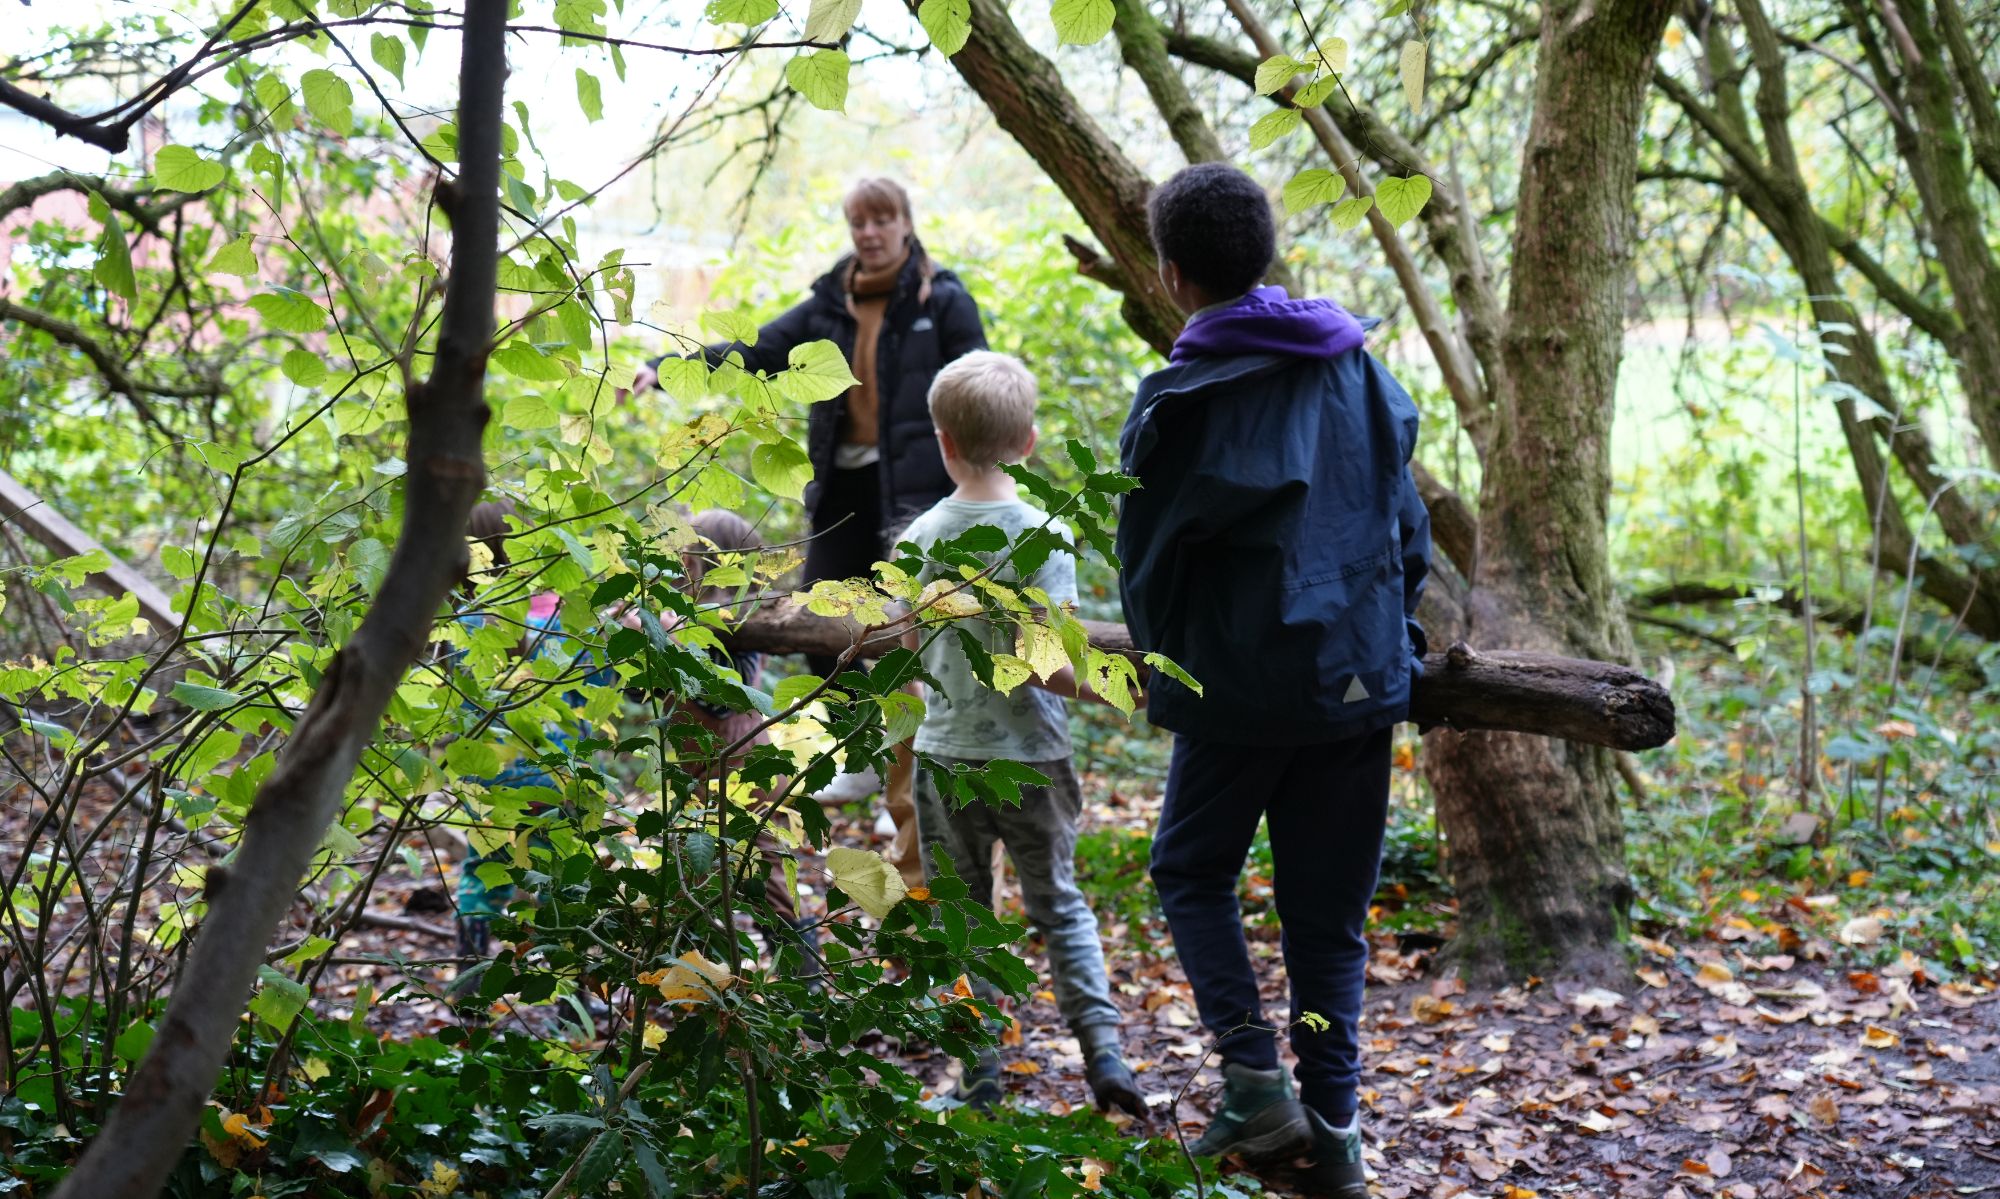 A staff member pointing and talking to two children in a forest.